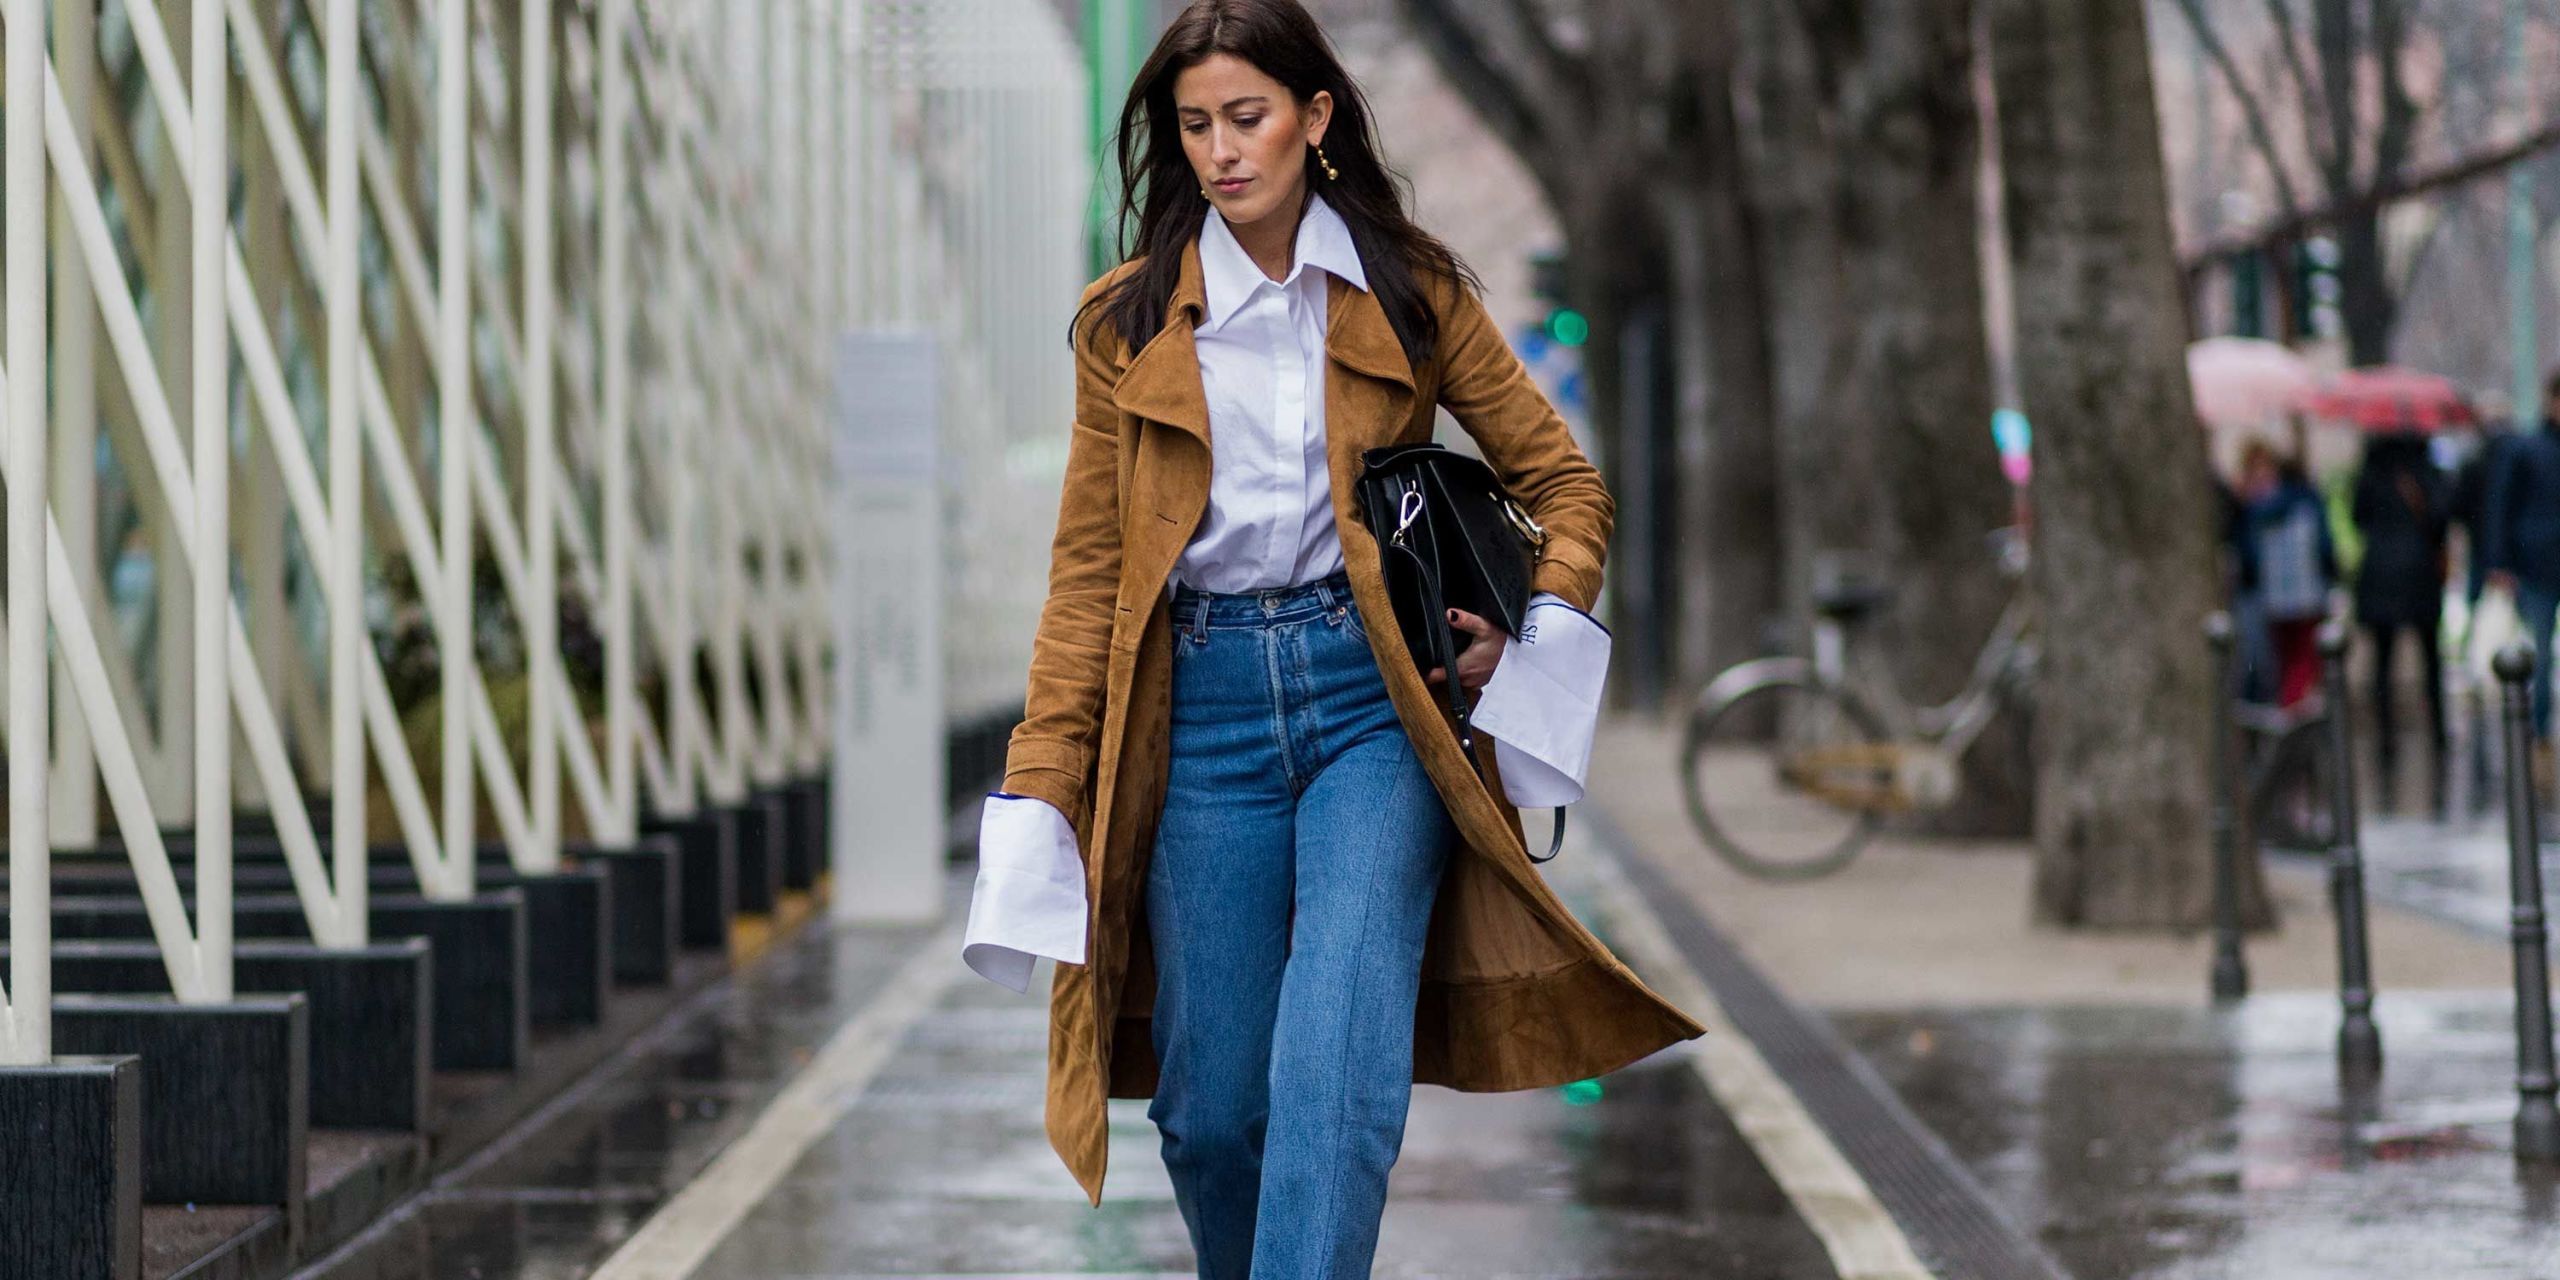 The Best Skinny Jeans Brands In The World Today | FashionBeans